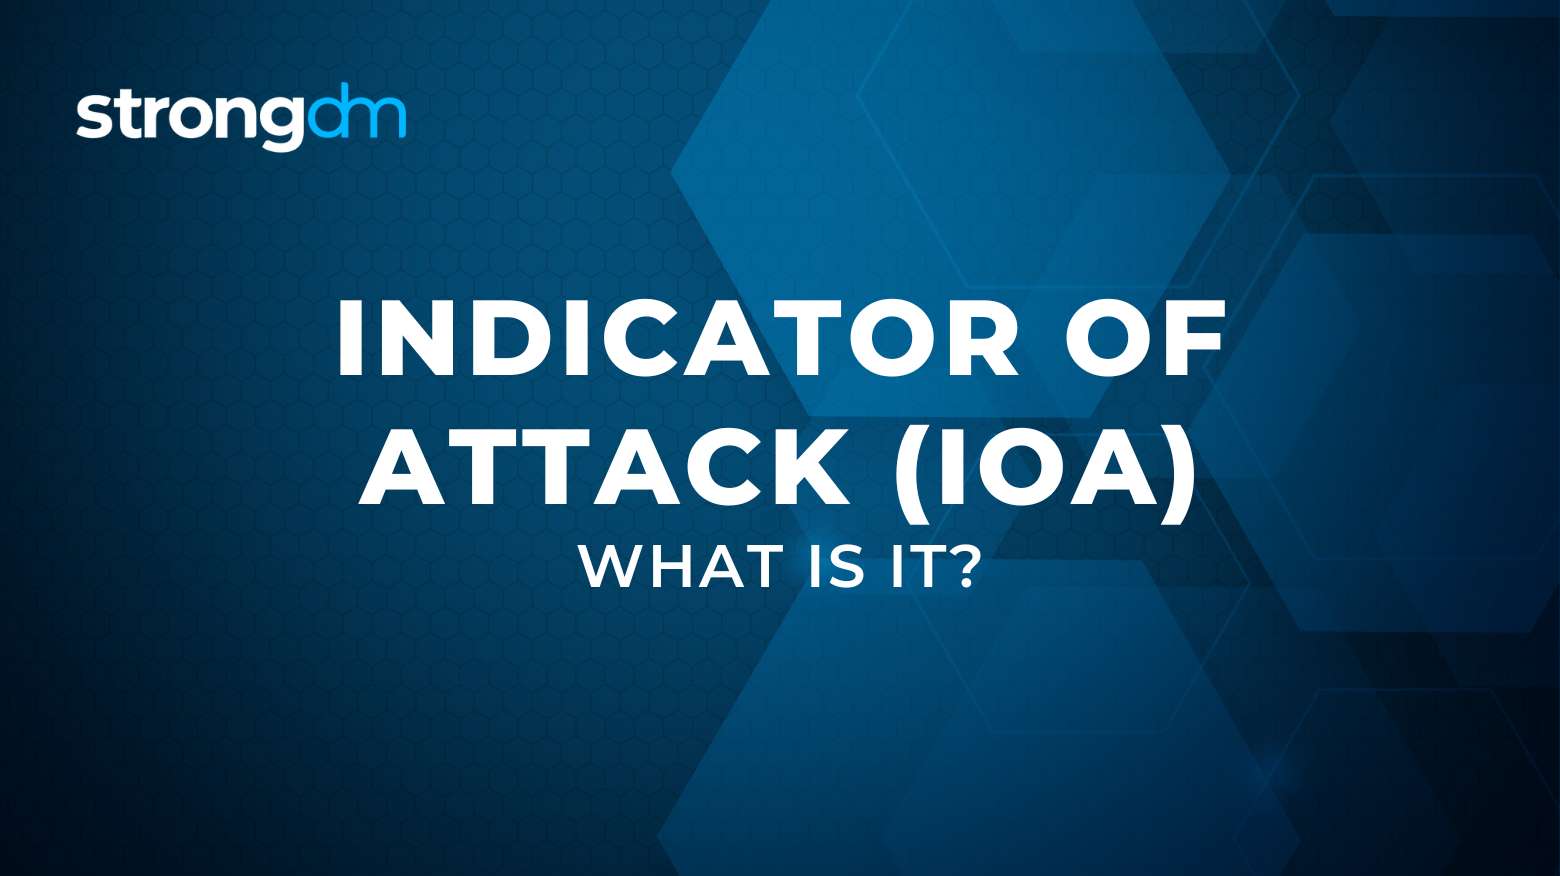 What Is Indicator of Attack (IOA) Security?